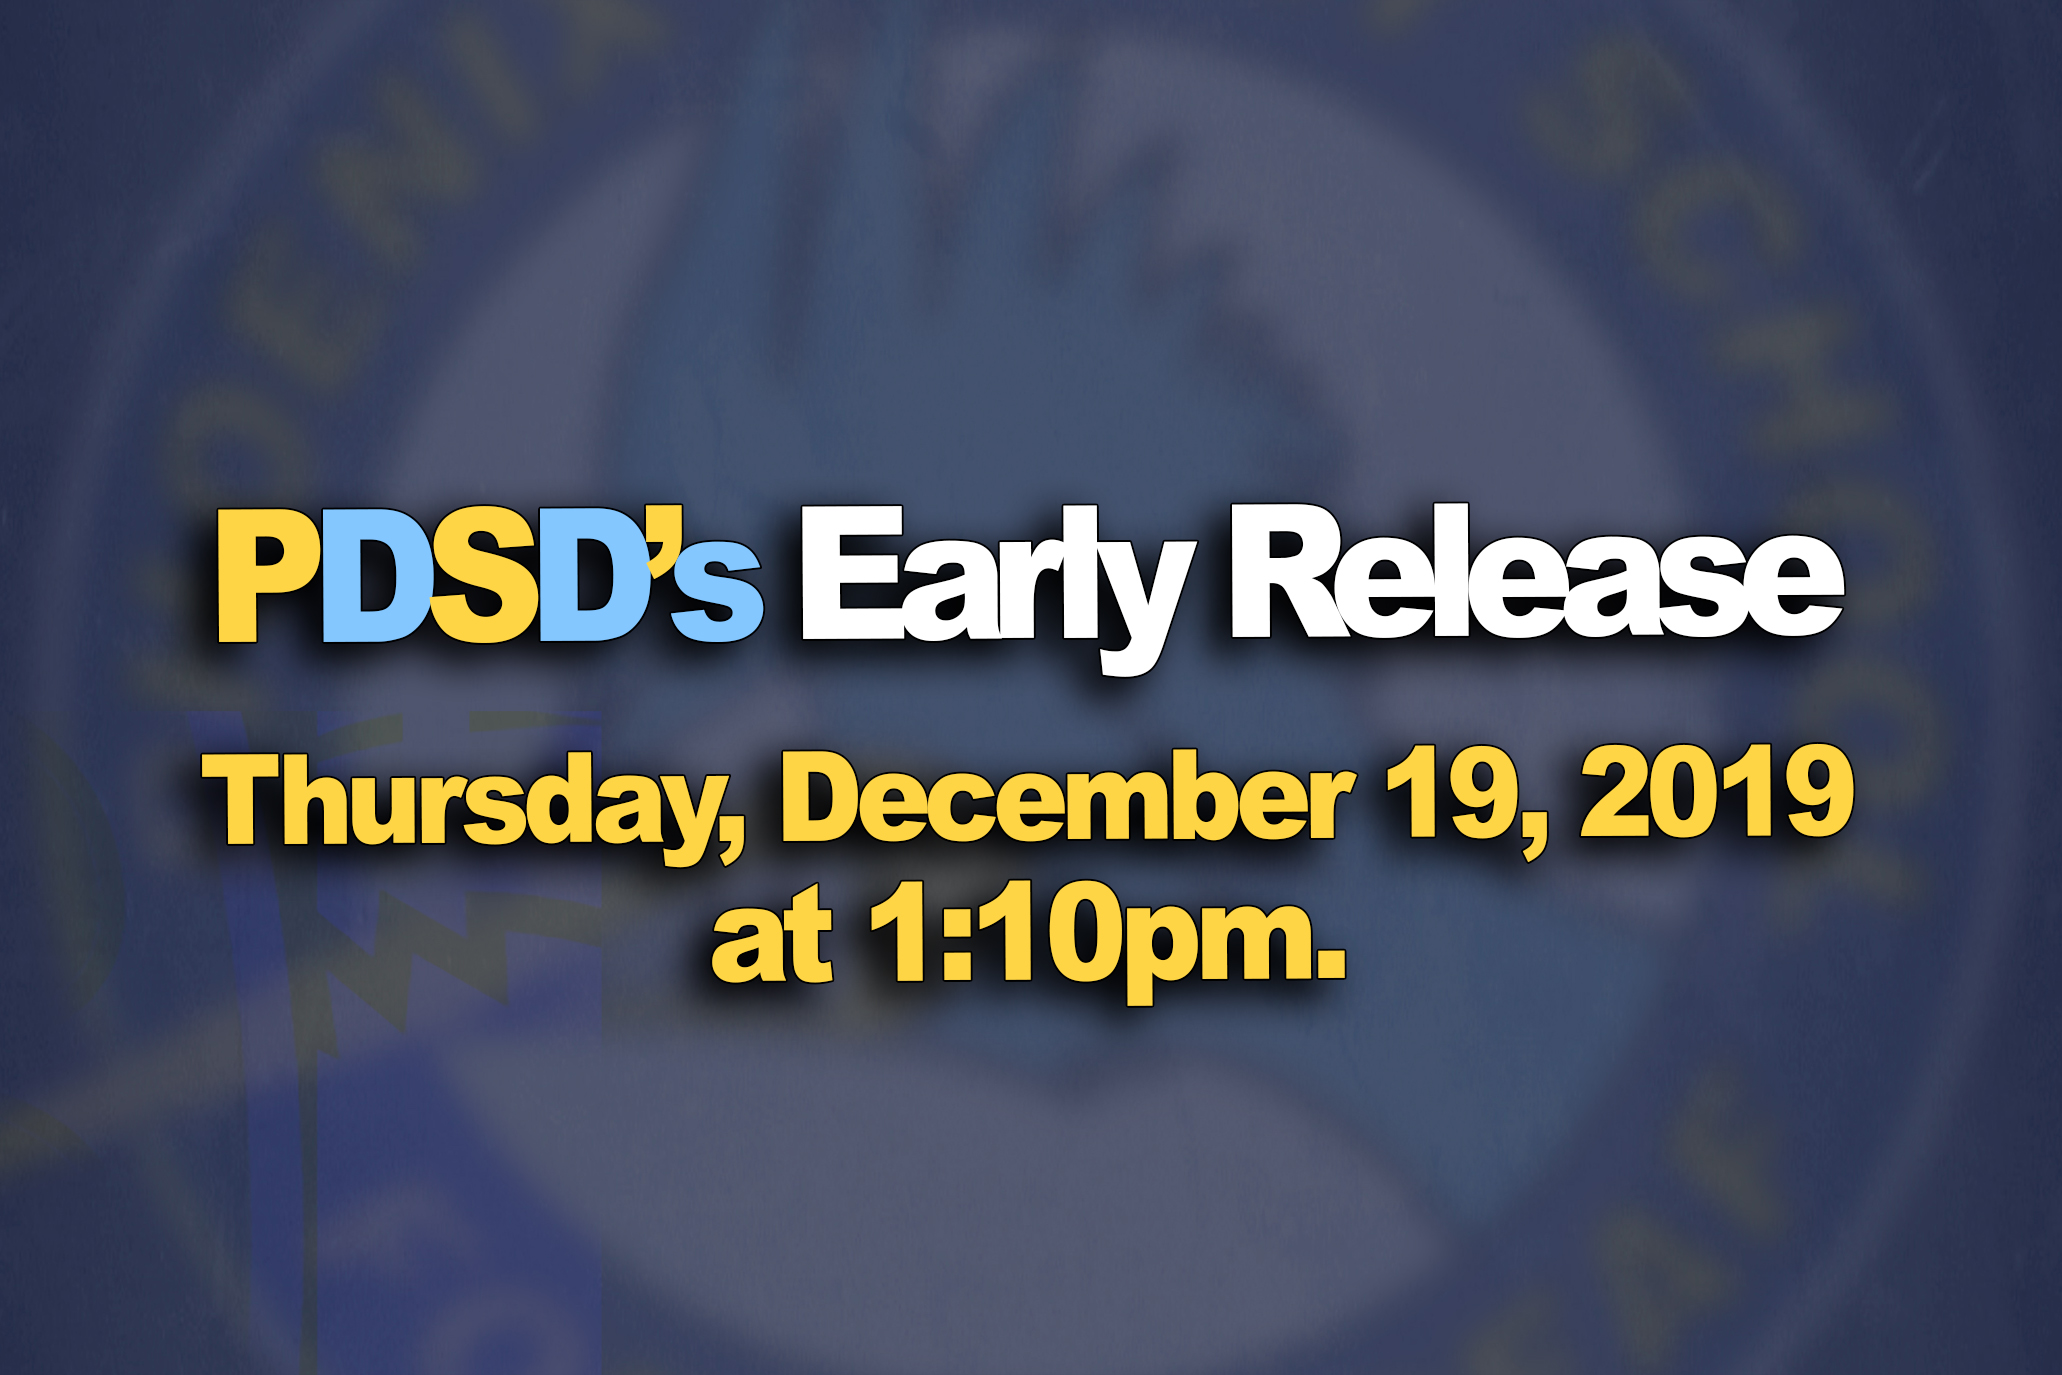 PDSD's Early Release. Thursday, December 19, 2019 at 1:10pm.